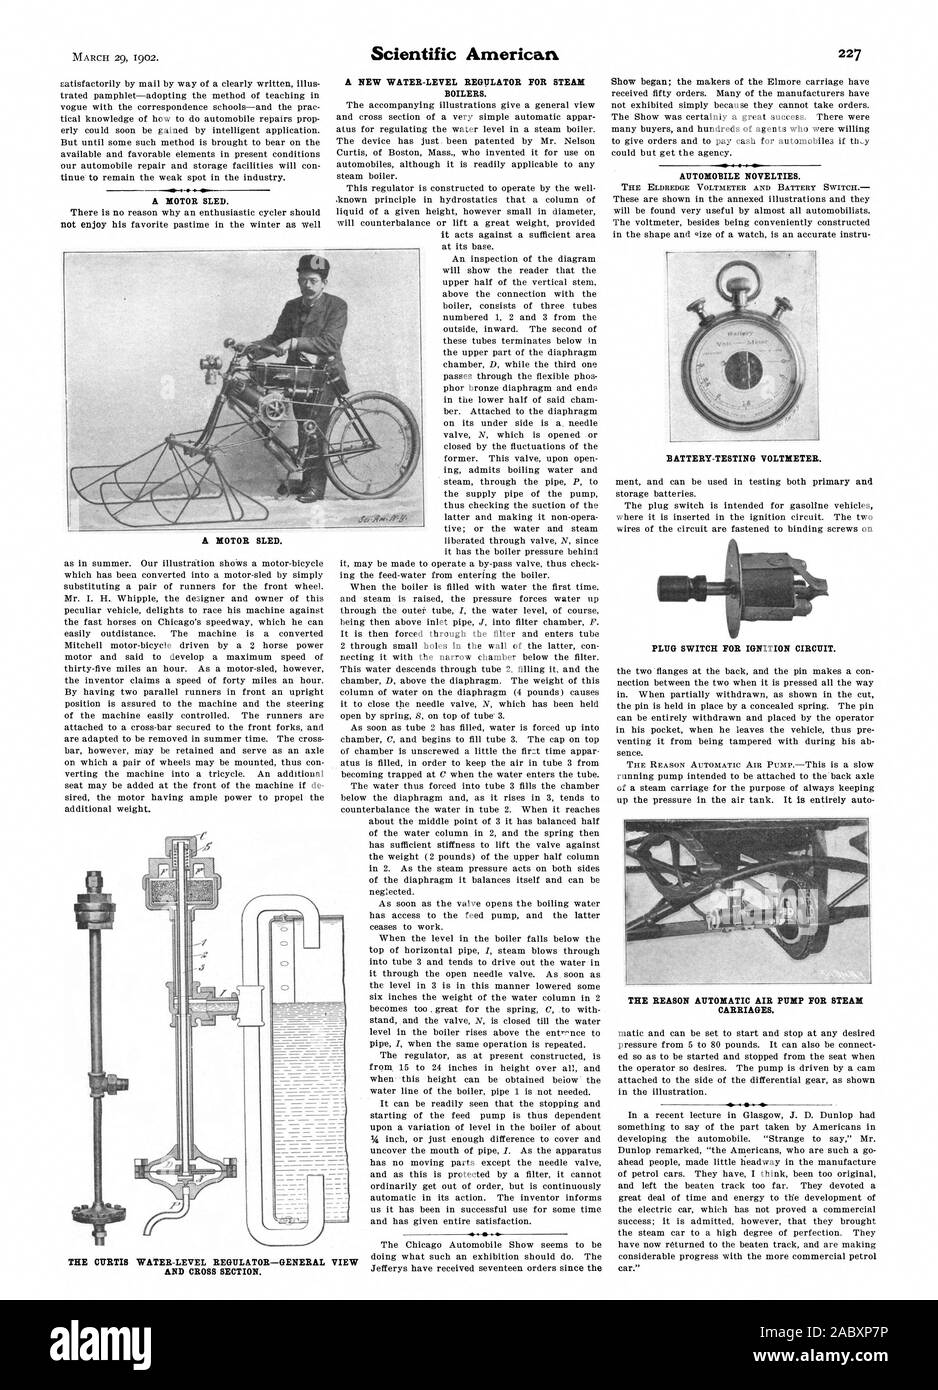 MARCH 29 1902. A MOTOR SLED. A NEW WATER-LEVEL REGULATOR FOR STEAM BOILERS. THE CURTIS WATER-LEVEL REGULATOR—GENERAL VIEW AND CROSS SECTION. AUTOMOBILE NOVELTIES. BATTERY-TESTING VOLTMETER. PLUG SWITCH FOR IGNITION CIRCUIT. THE REASON AUTOMATIC AIR PUMP FOR STEAM CARRIAGES., scientific american, 1902-03-29 Stock Photo